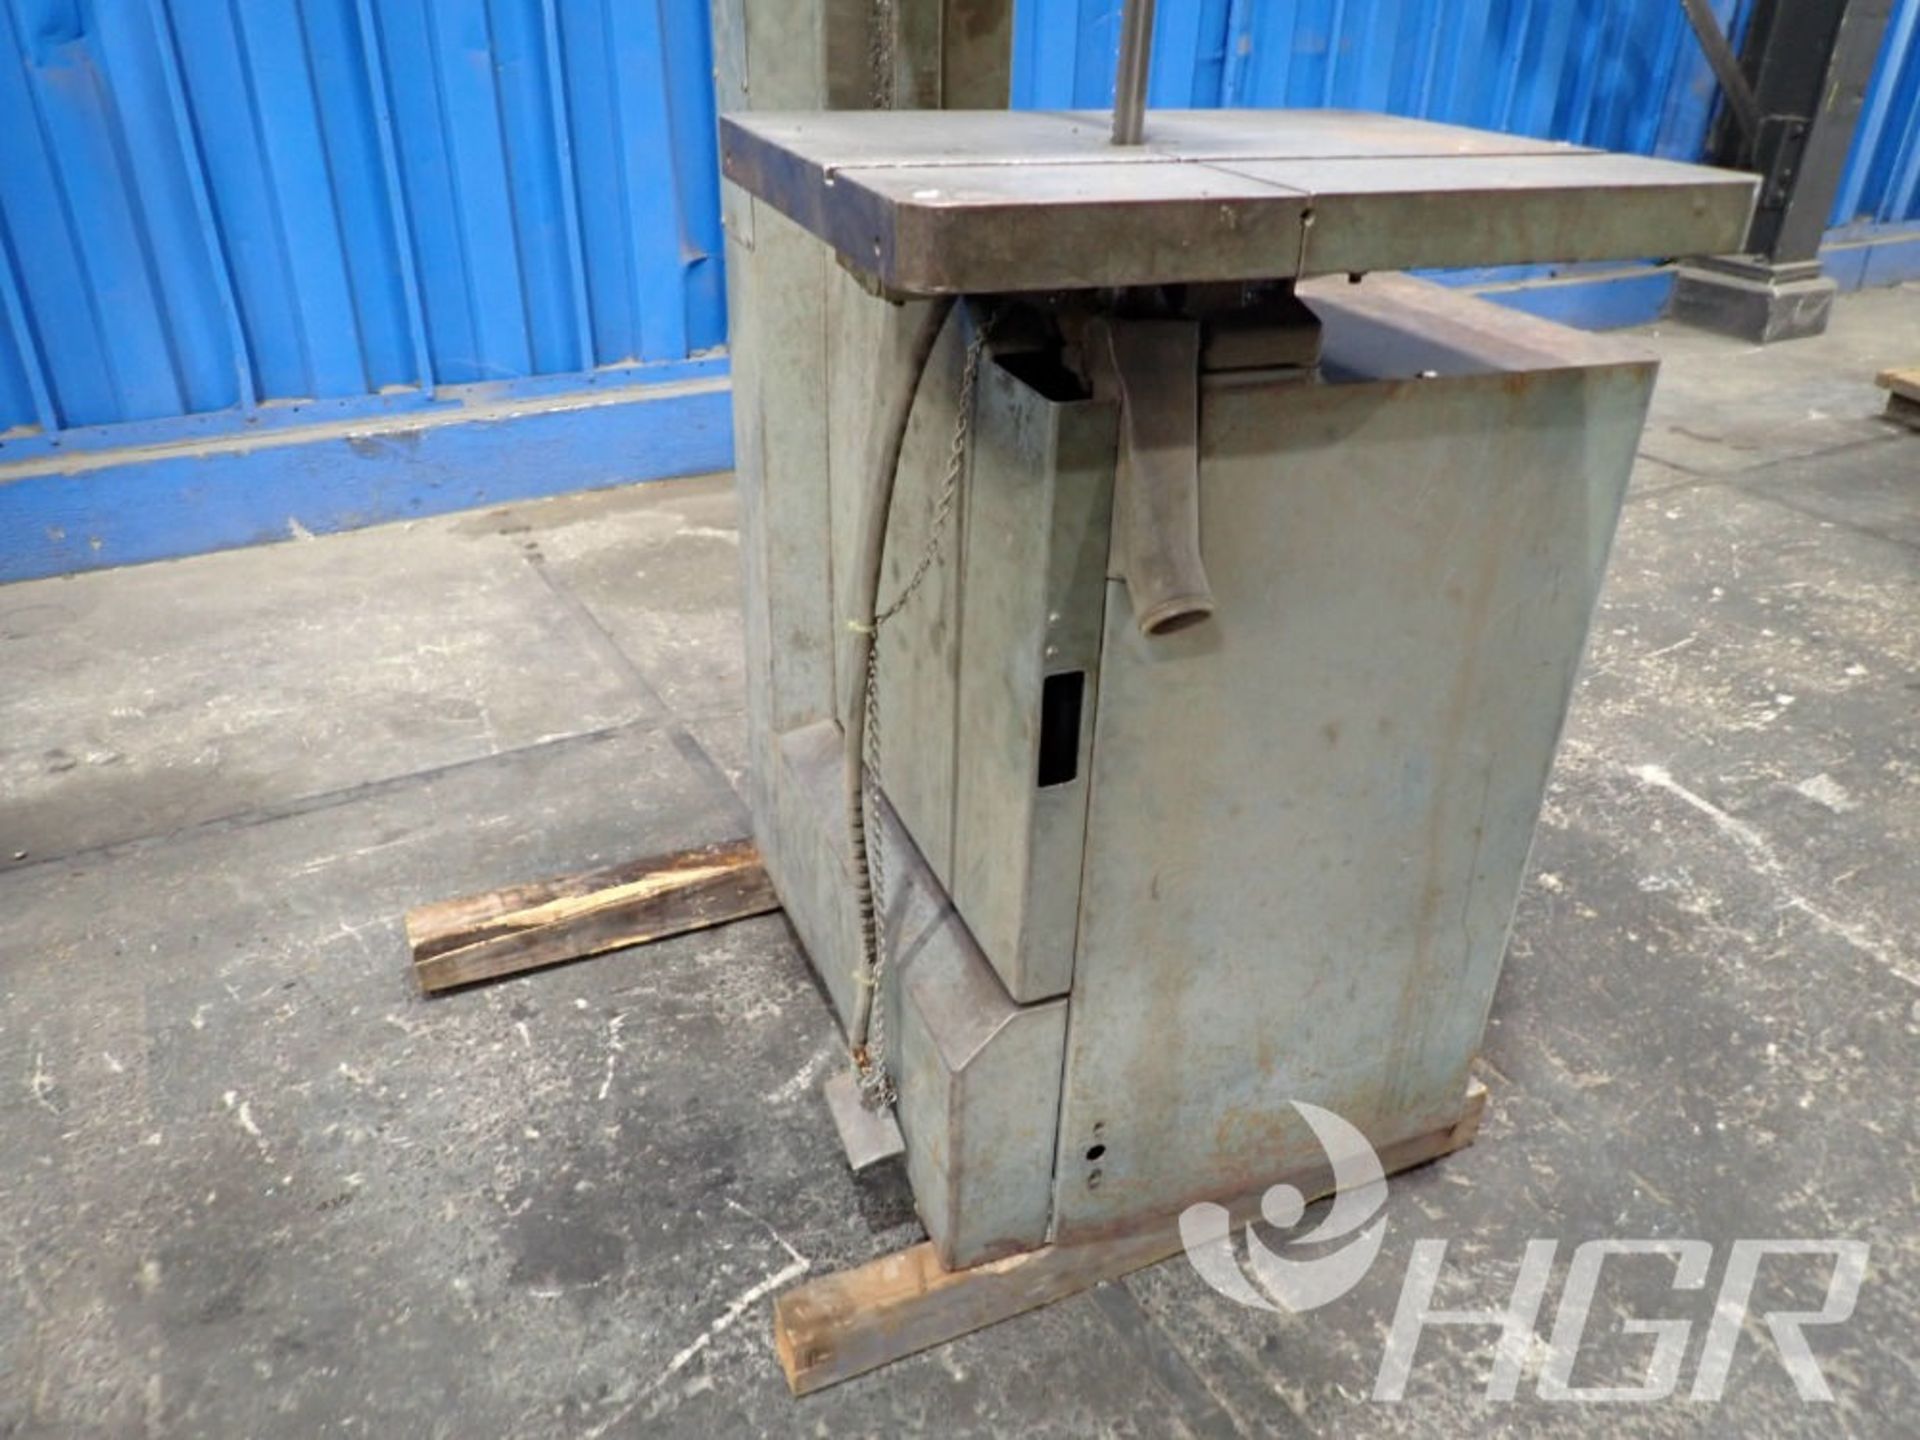 DELTA VERTICAL BAND SAW , Model 28-654, Date: n/a; s/n 88FA2262, Approx. Capacity: 20X8, Power: 3/ - Image 3 of 8